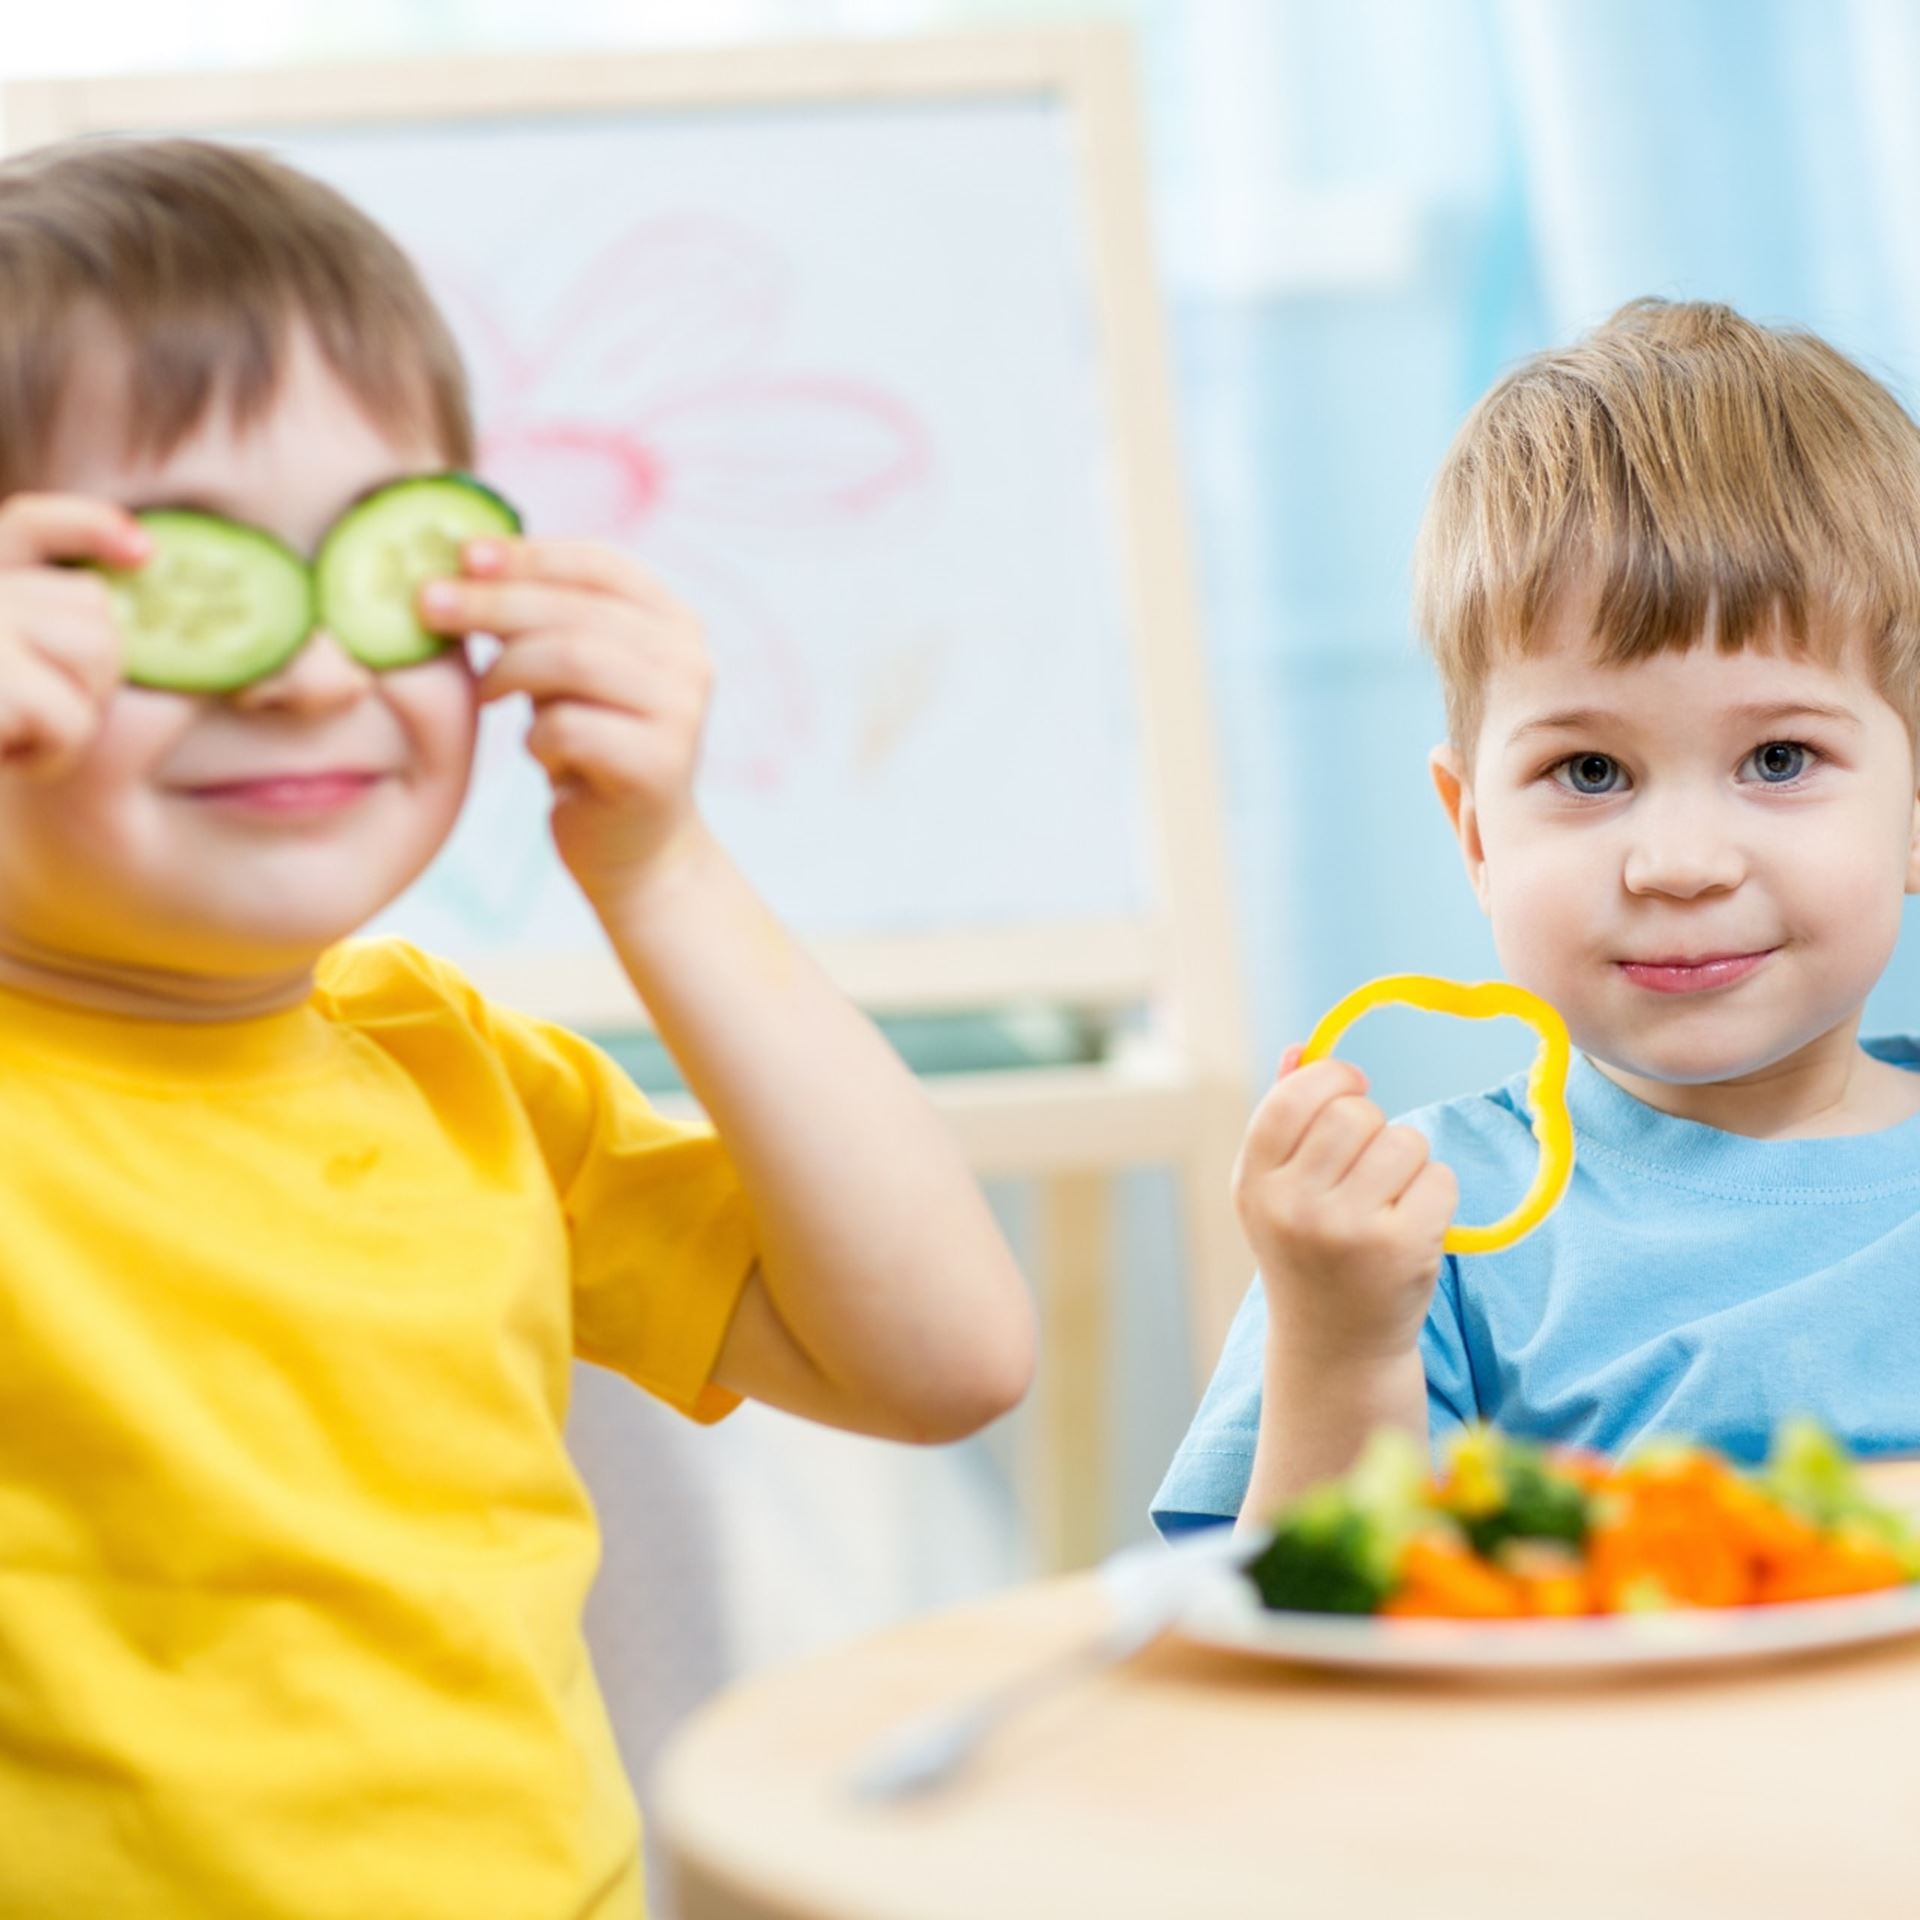 2 kids with with veggies in face